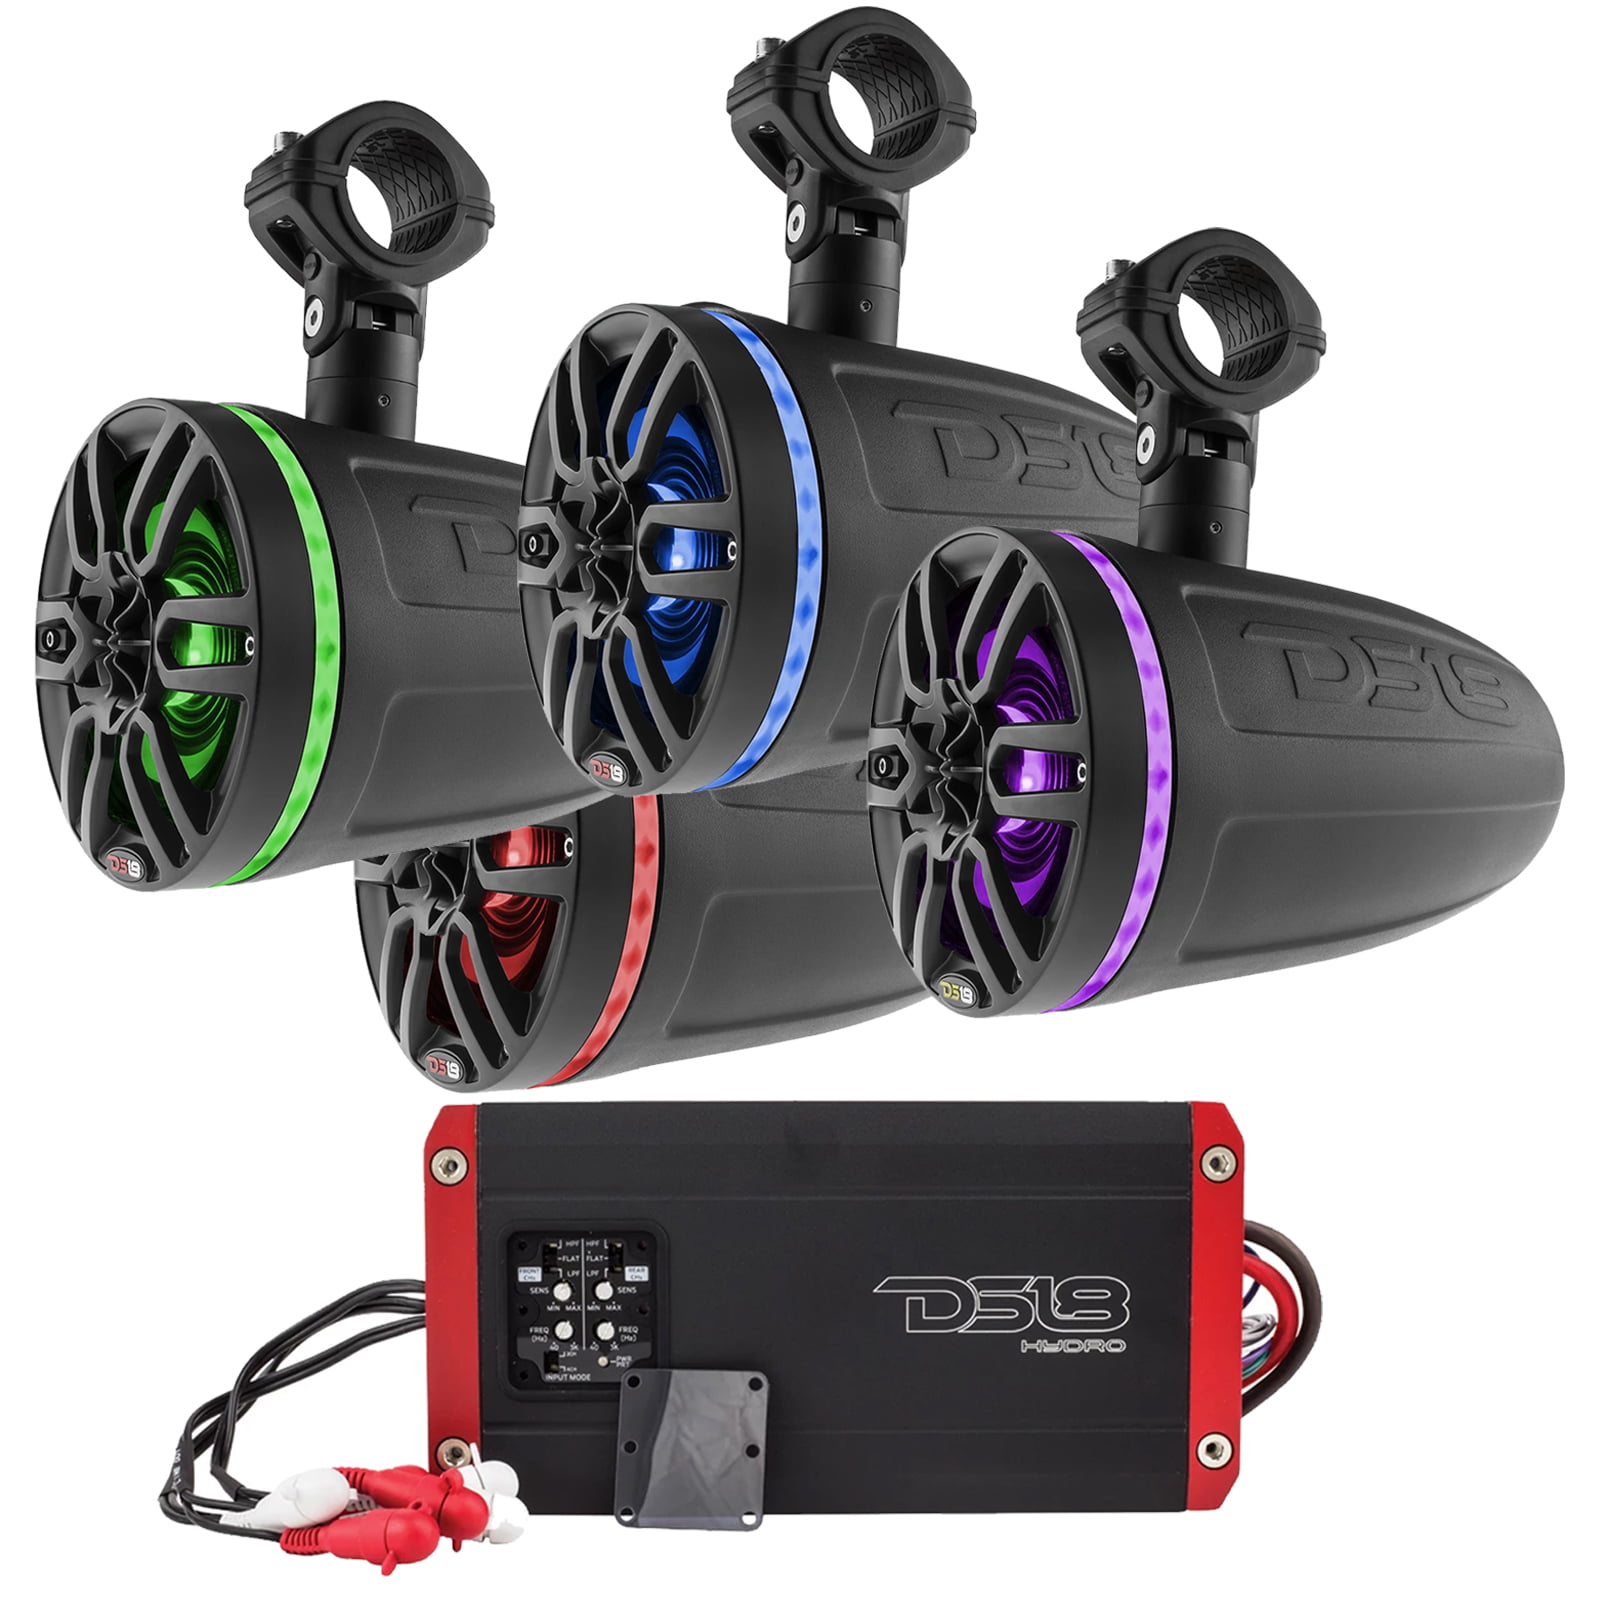 wakeboard tower speakers with led lights